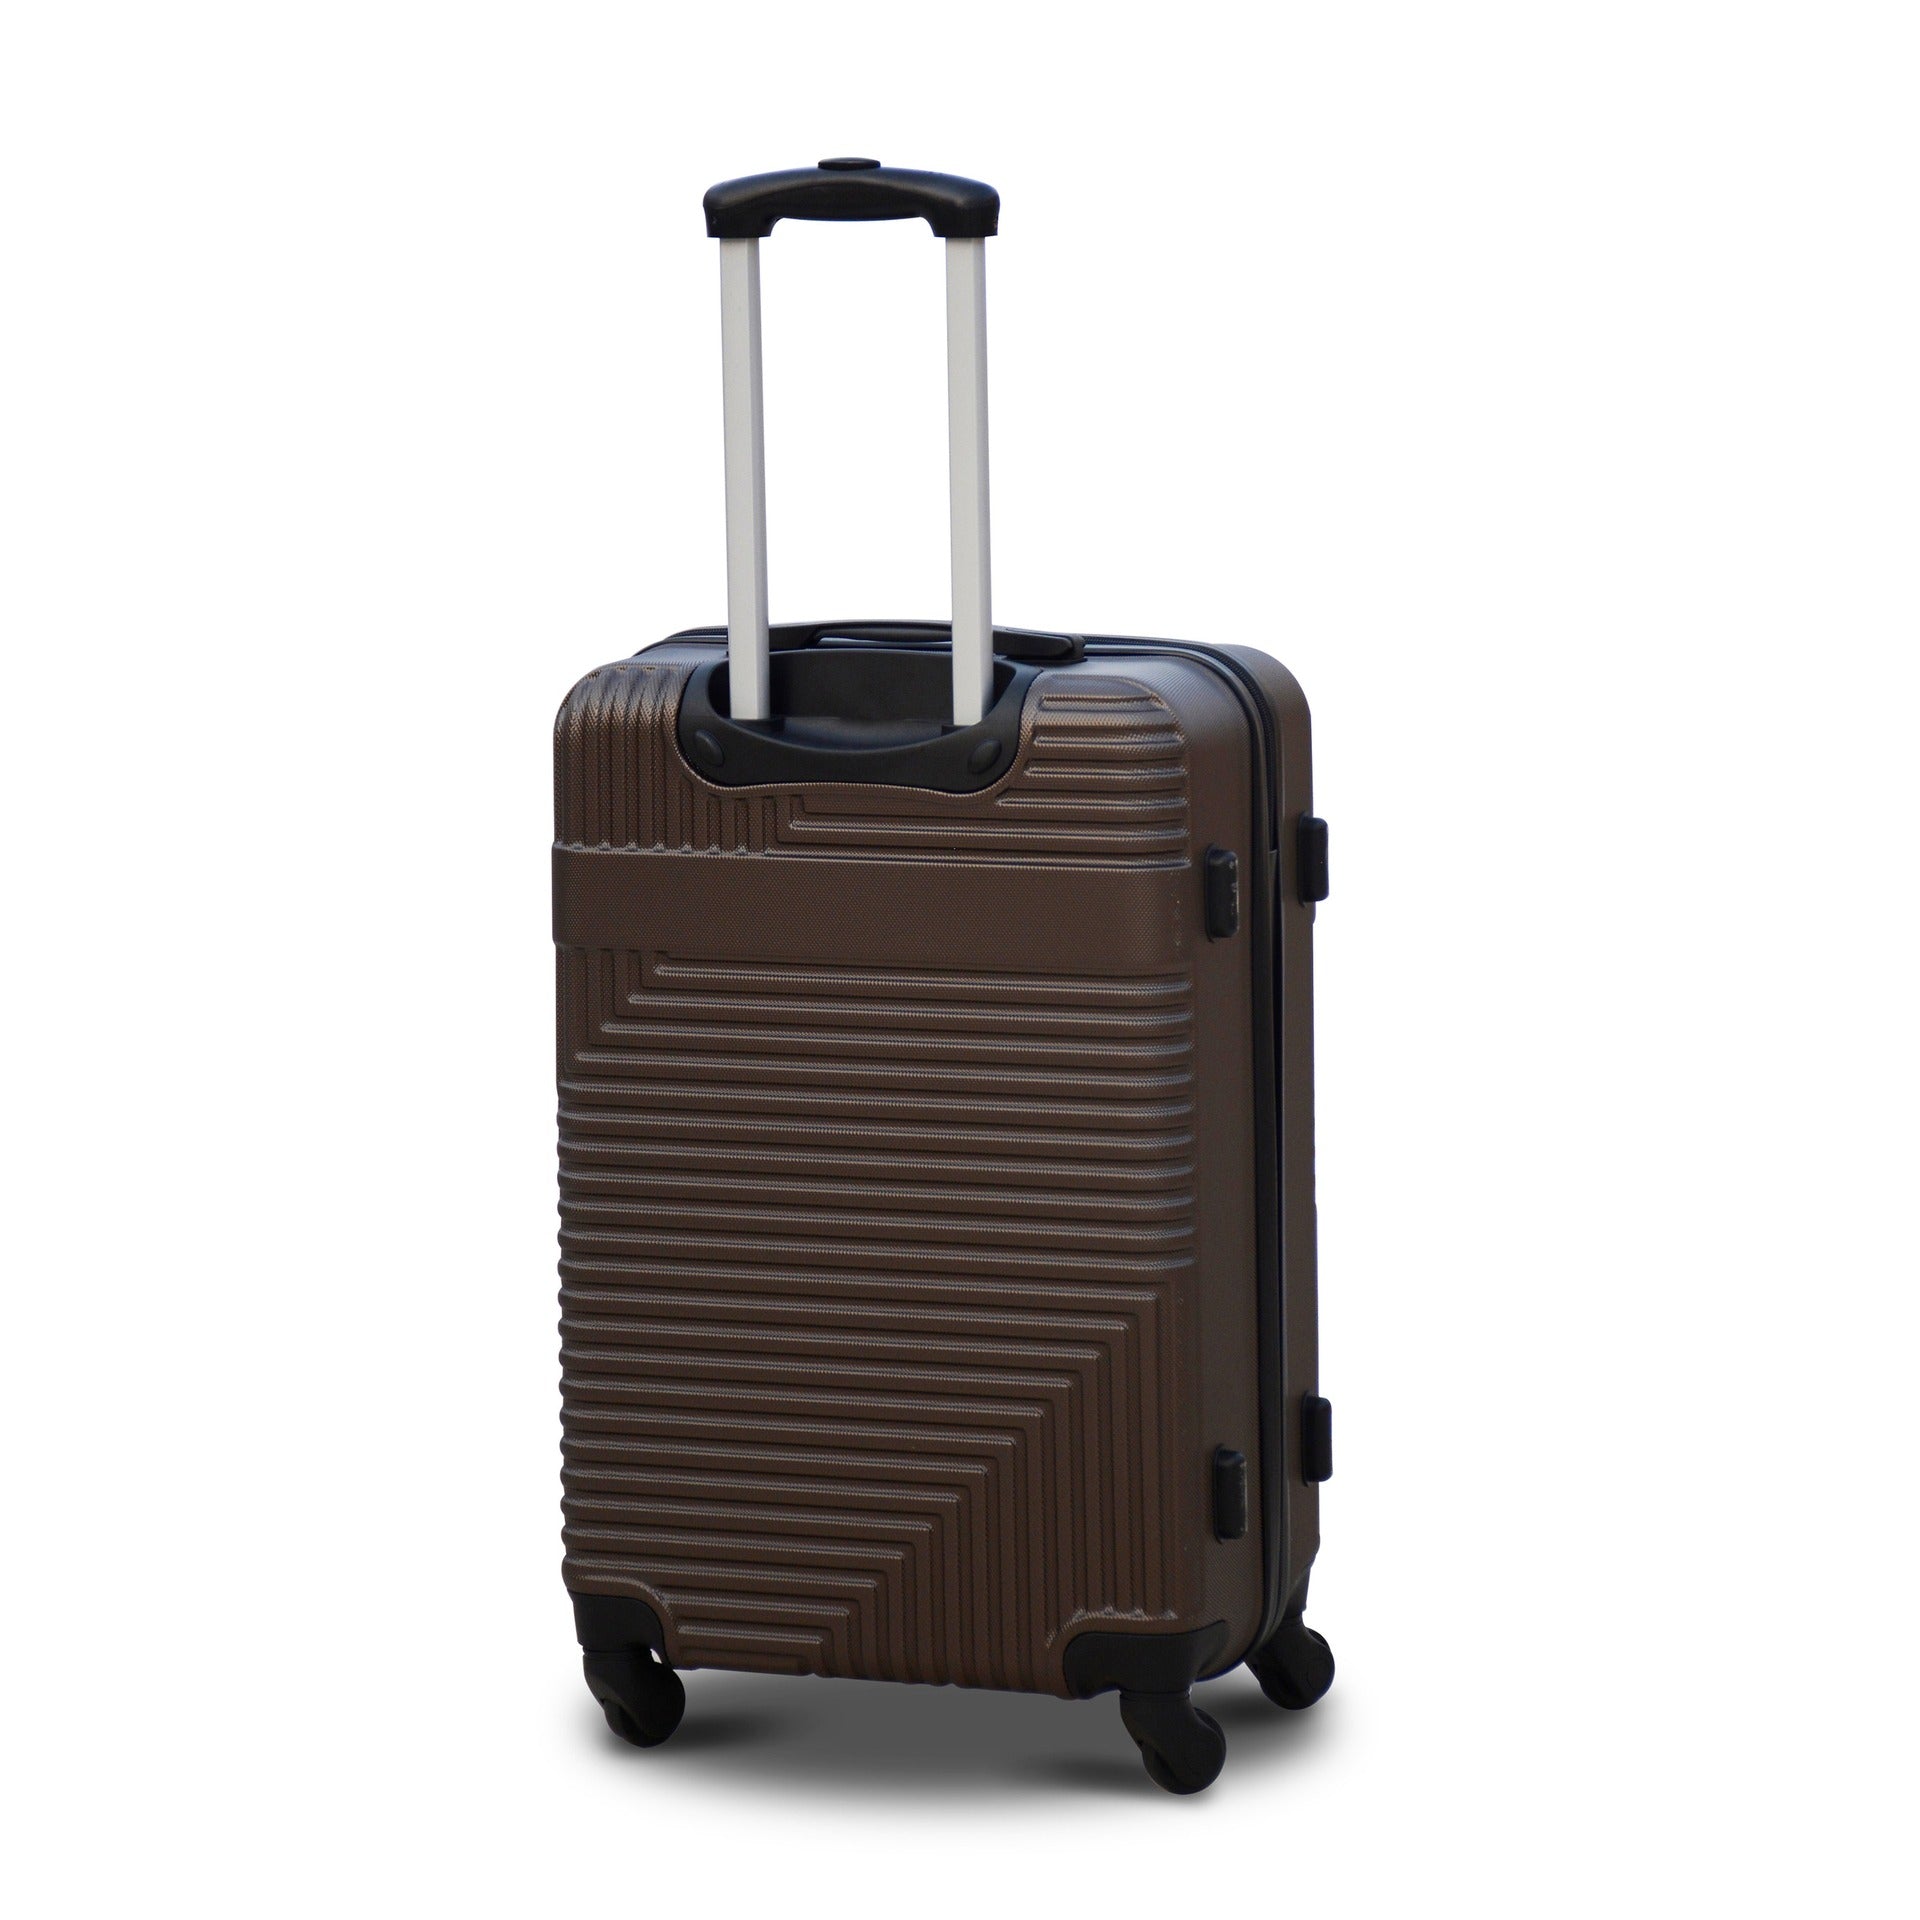 24" Brown Colour Travel Way ABS Luggage Lightweight Hard Case Trolley Bag Zaappy.com